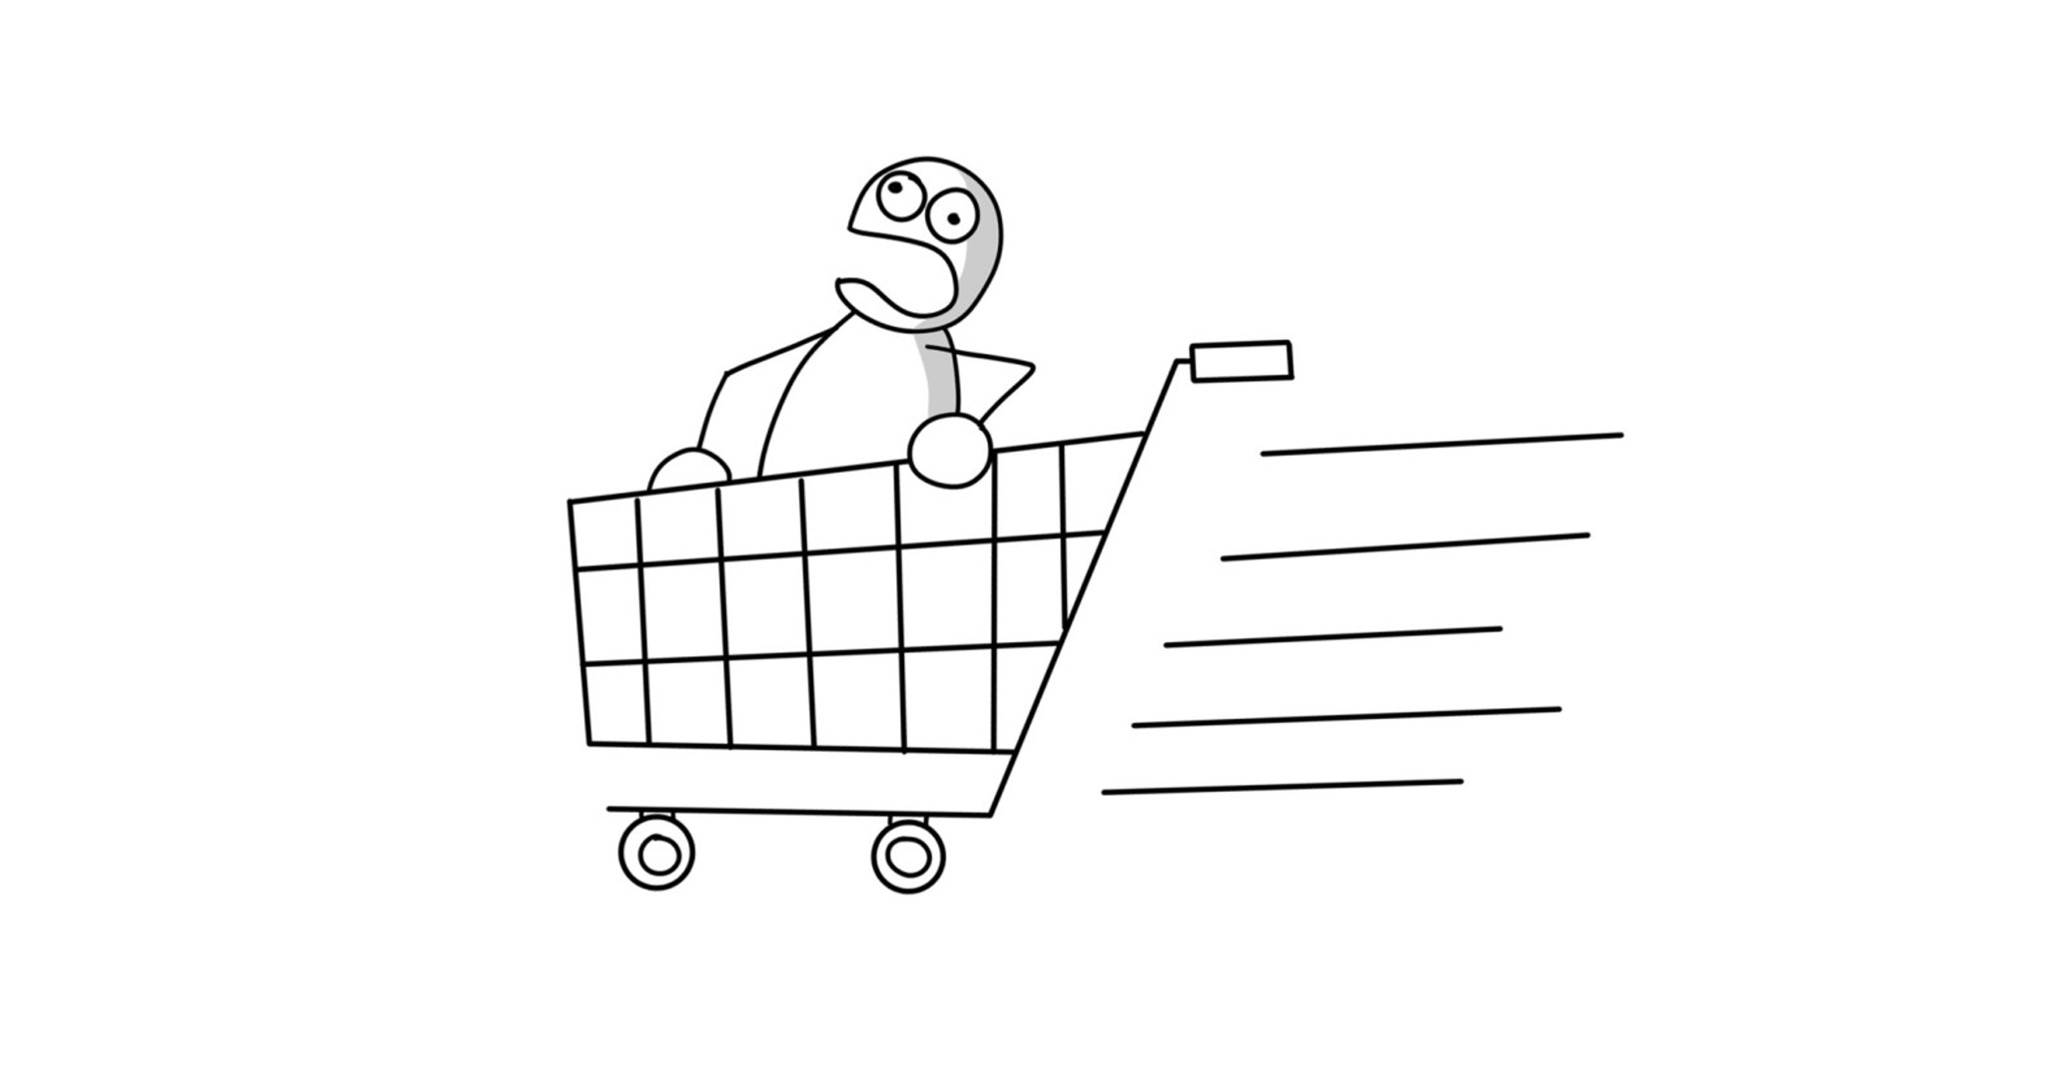 Chapter 26: The Shopping Cart – What an unusual ride to the bar taught me about control